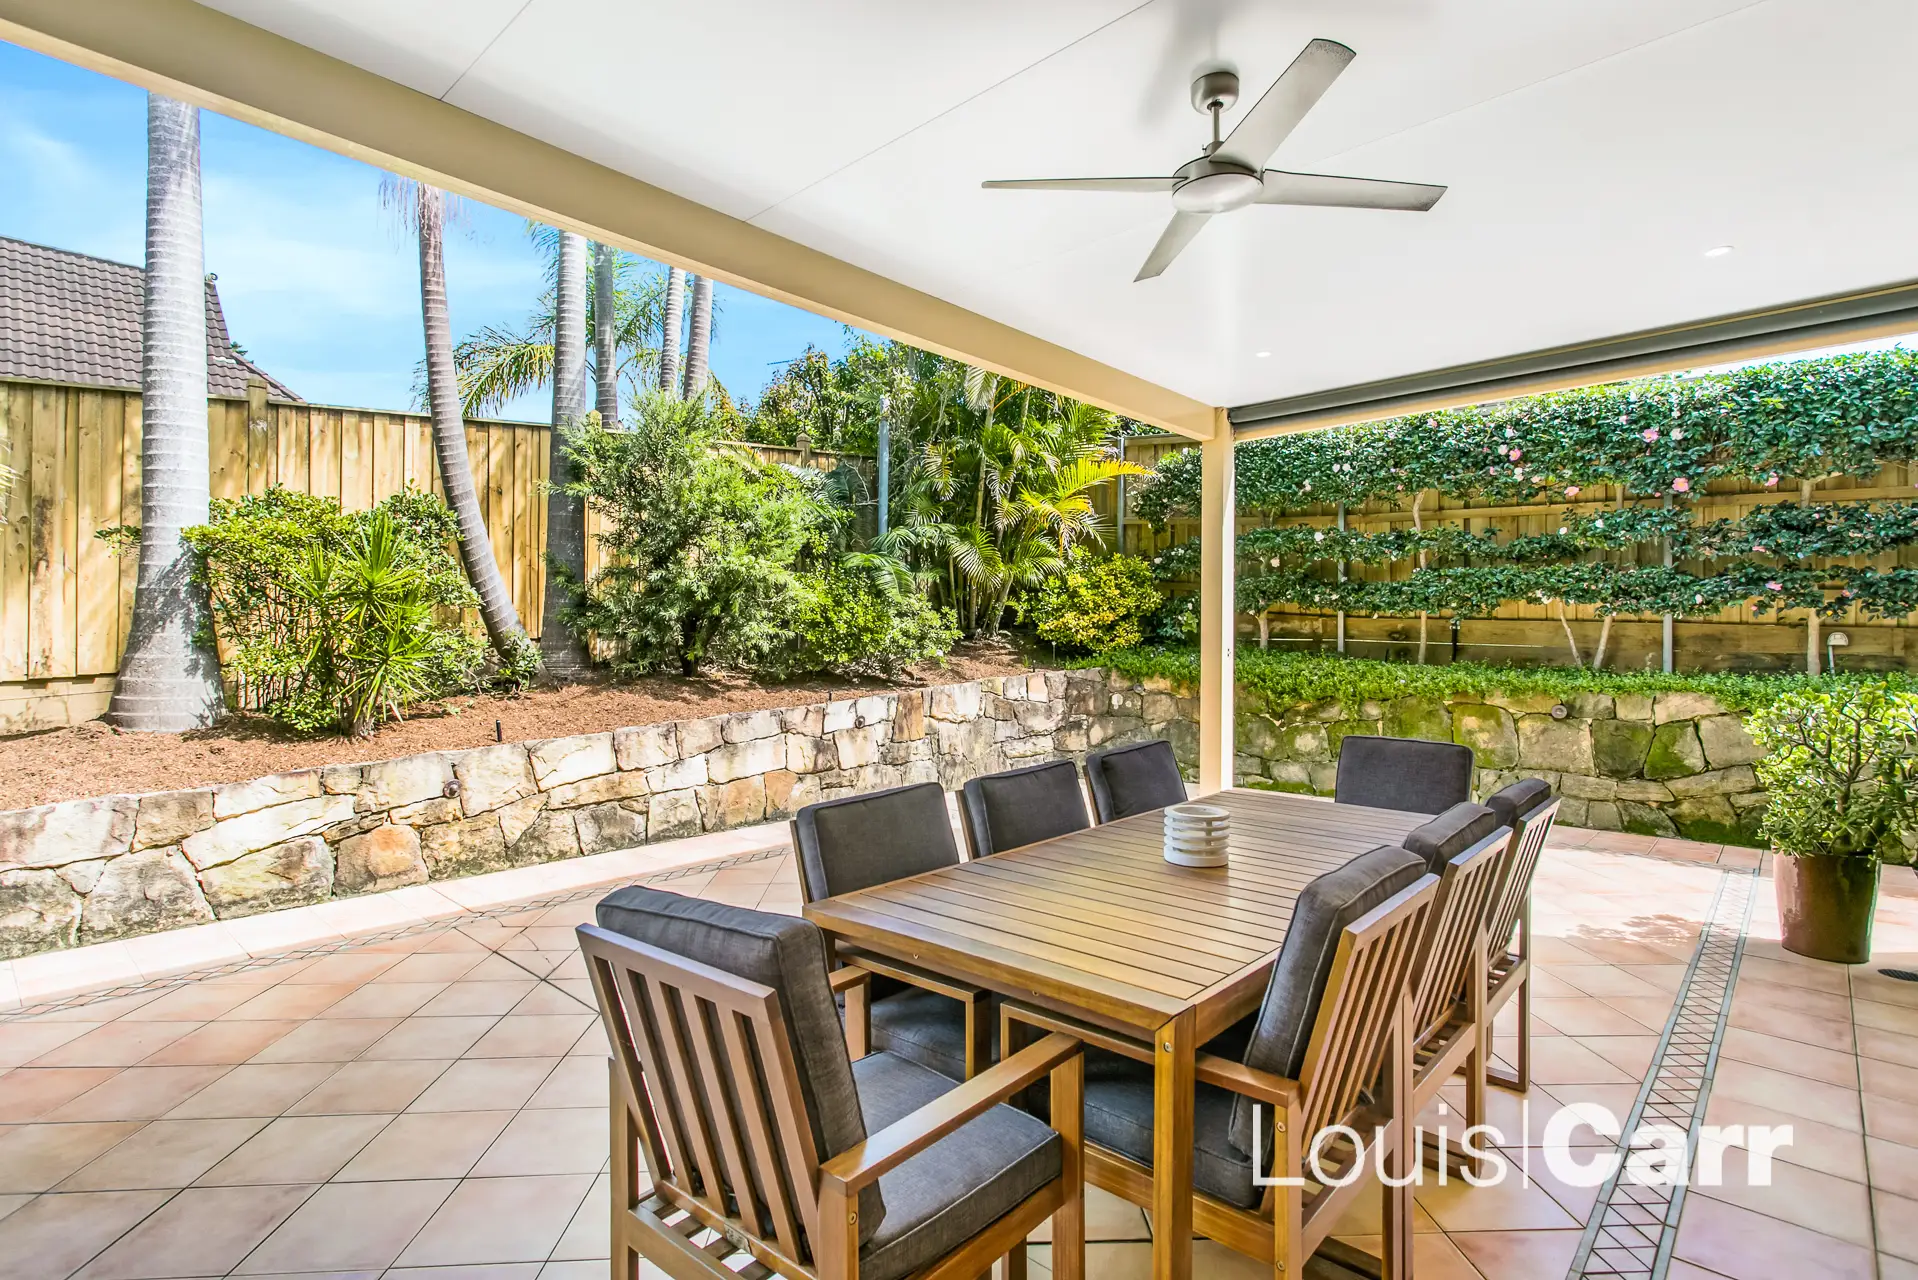 Photo #6: 24 Haven Court, Cherrybrook - Sold by Louis Carr Real Estate